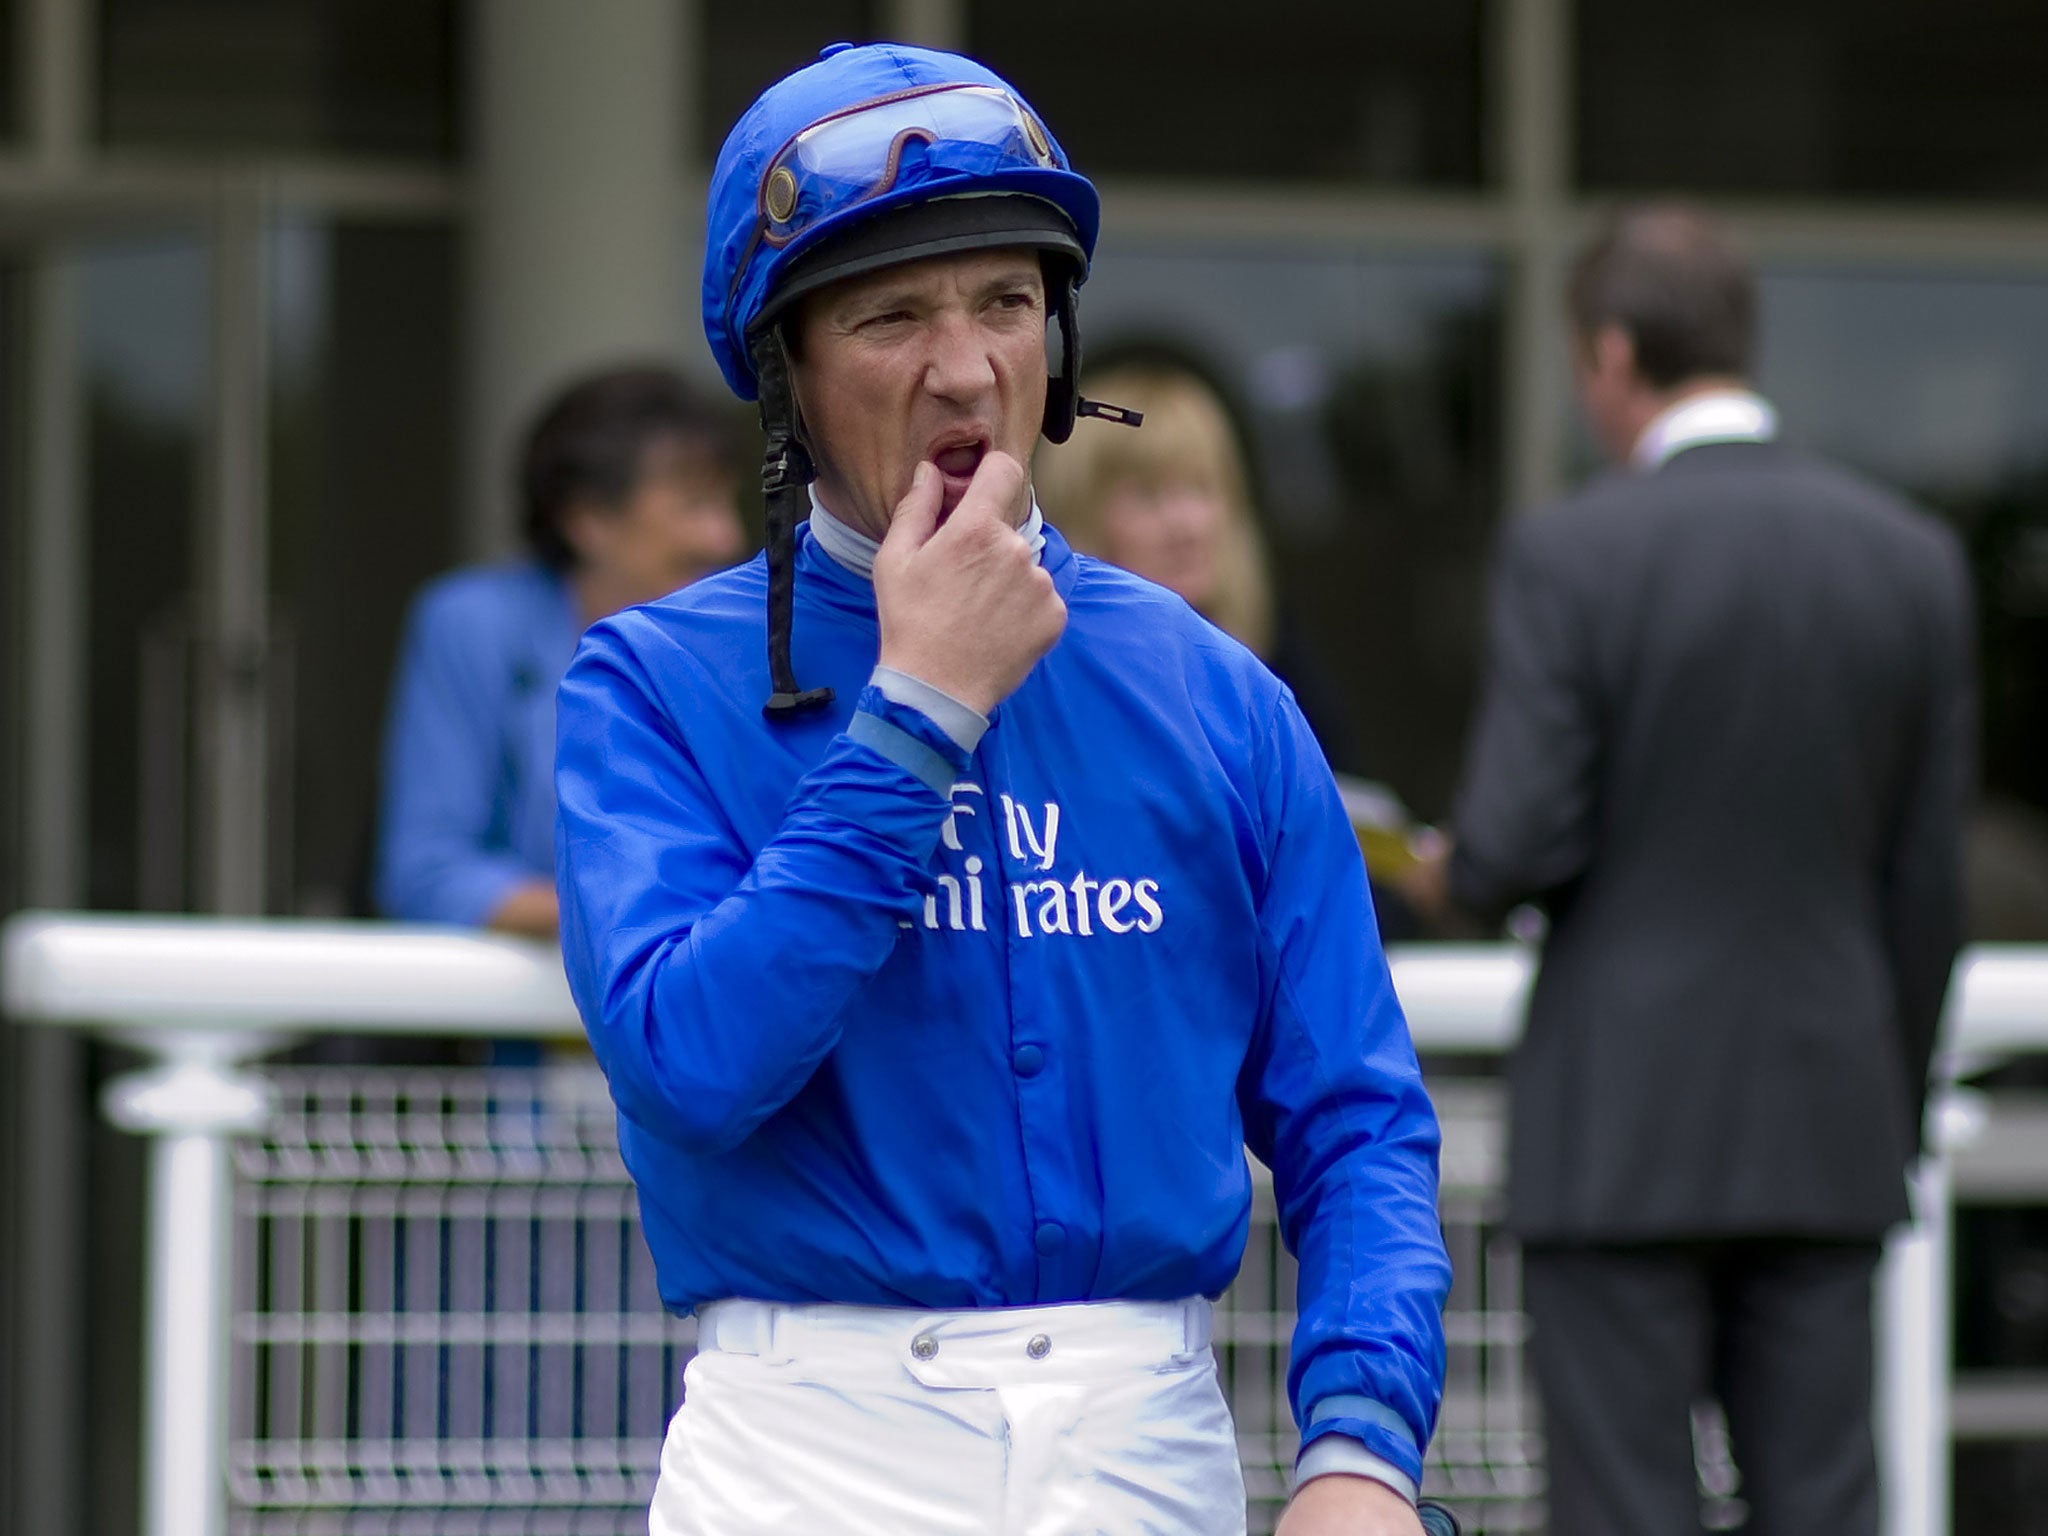 Colour change: Frankie Dettori will not have the security of riding in Godolphin blue when he returns as a freelance